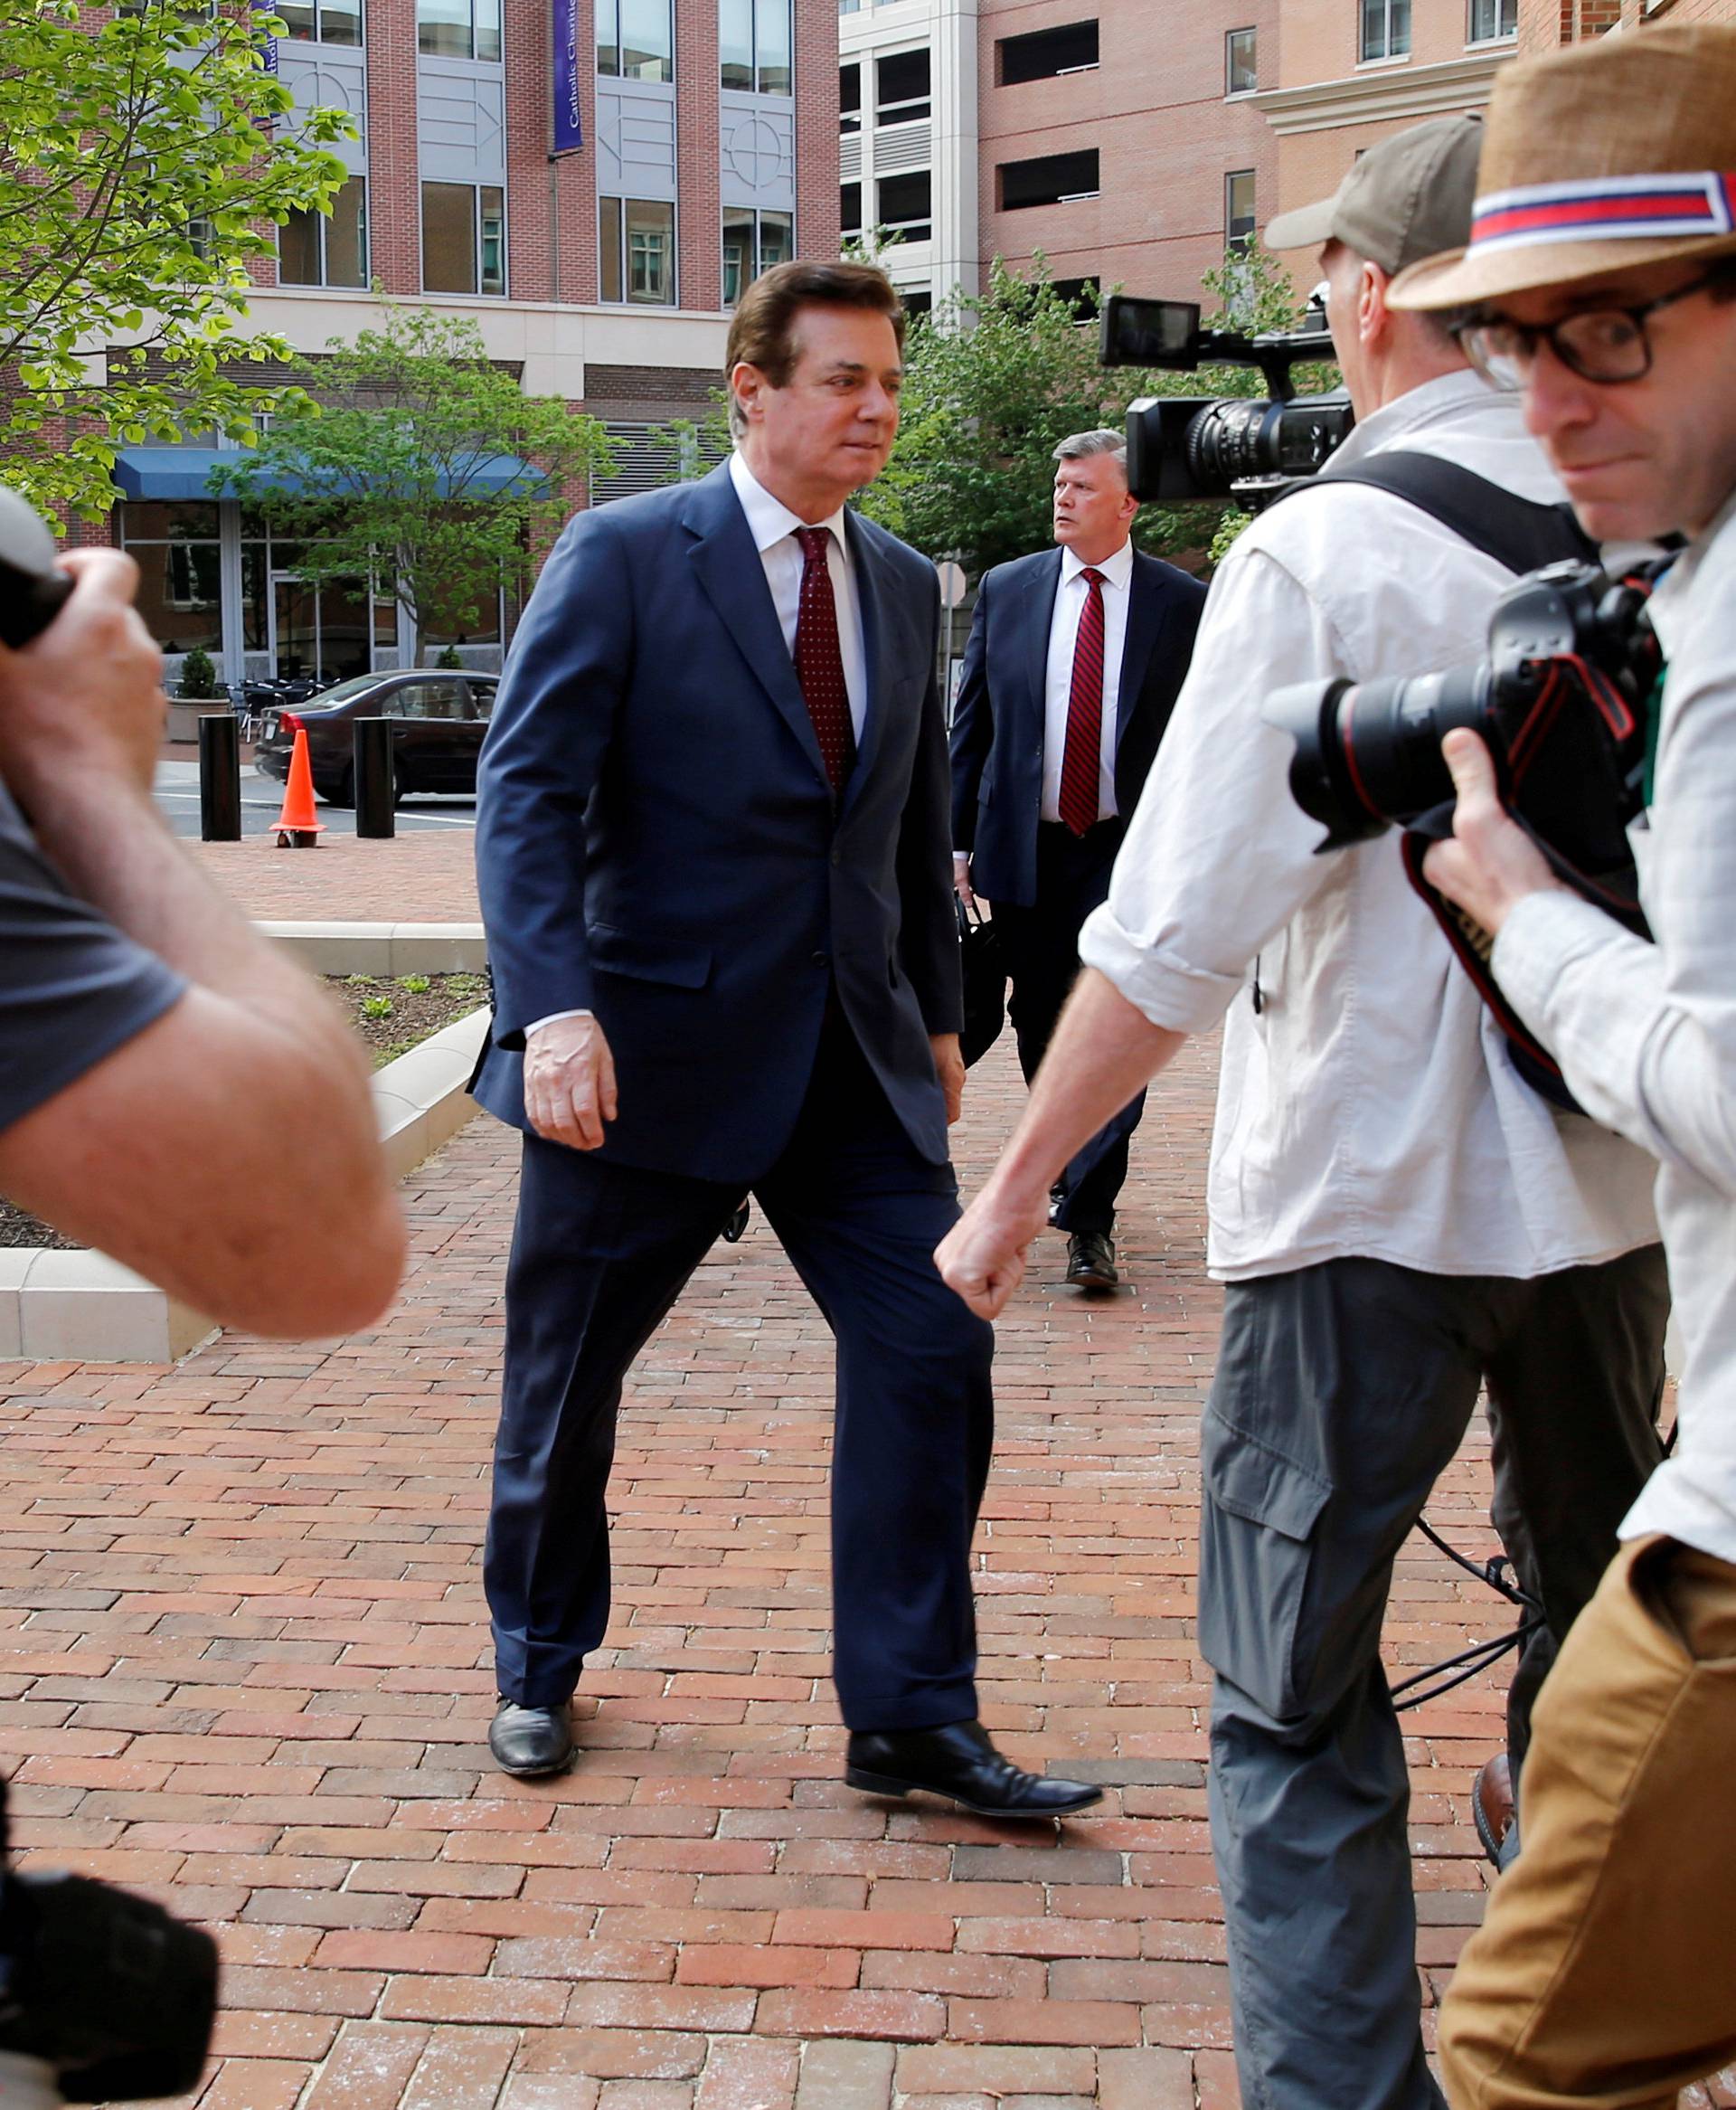 FILE PHOTO: Manafort arrives at U.S. District Court for a motions hearing in Alexandria, Virginia